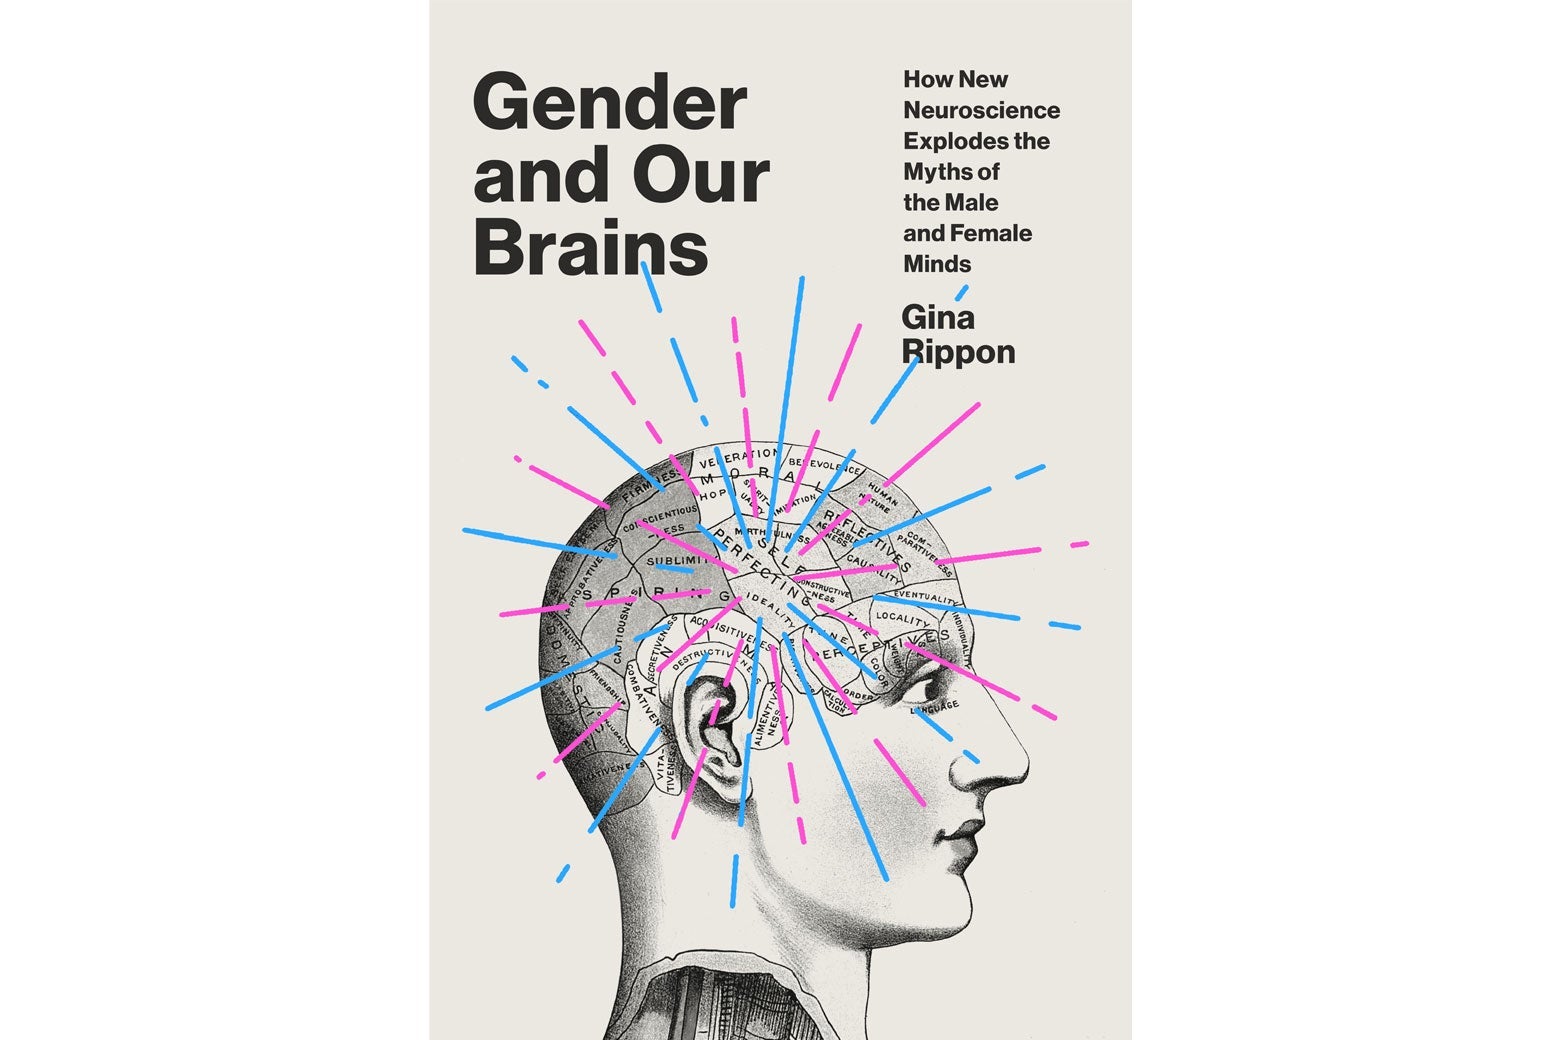 Gender and Our Brains book cover.